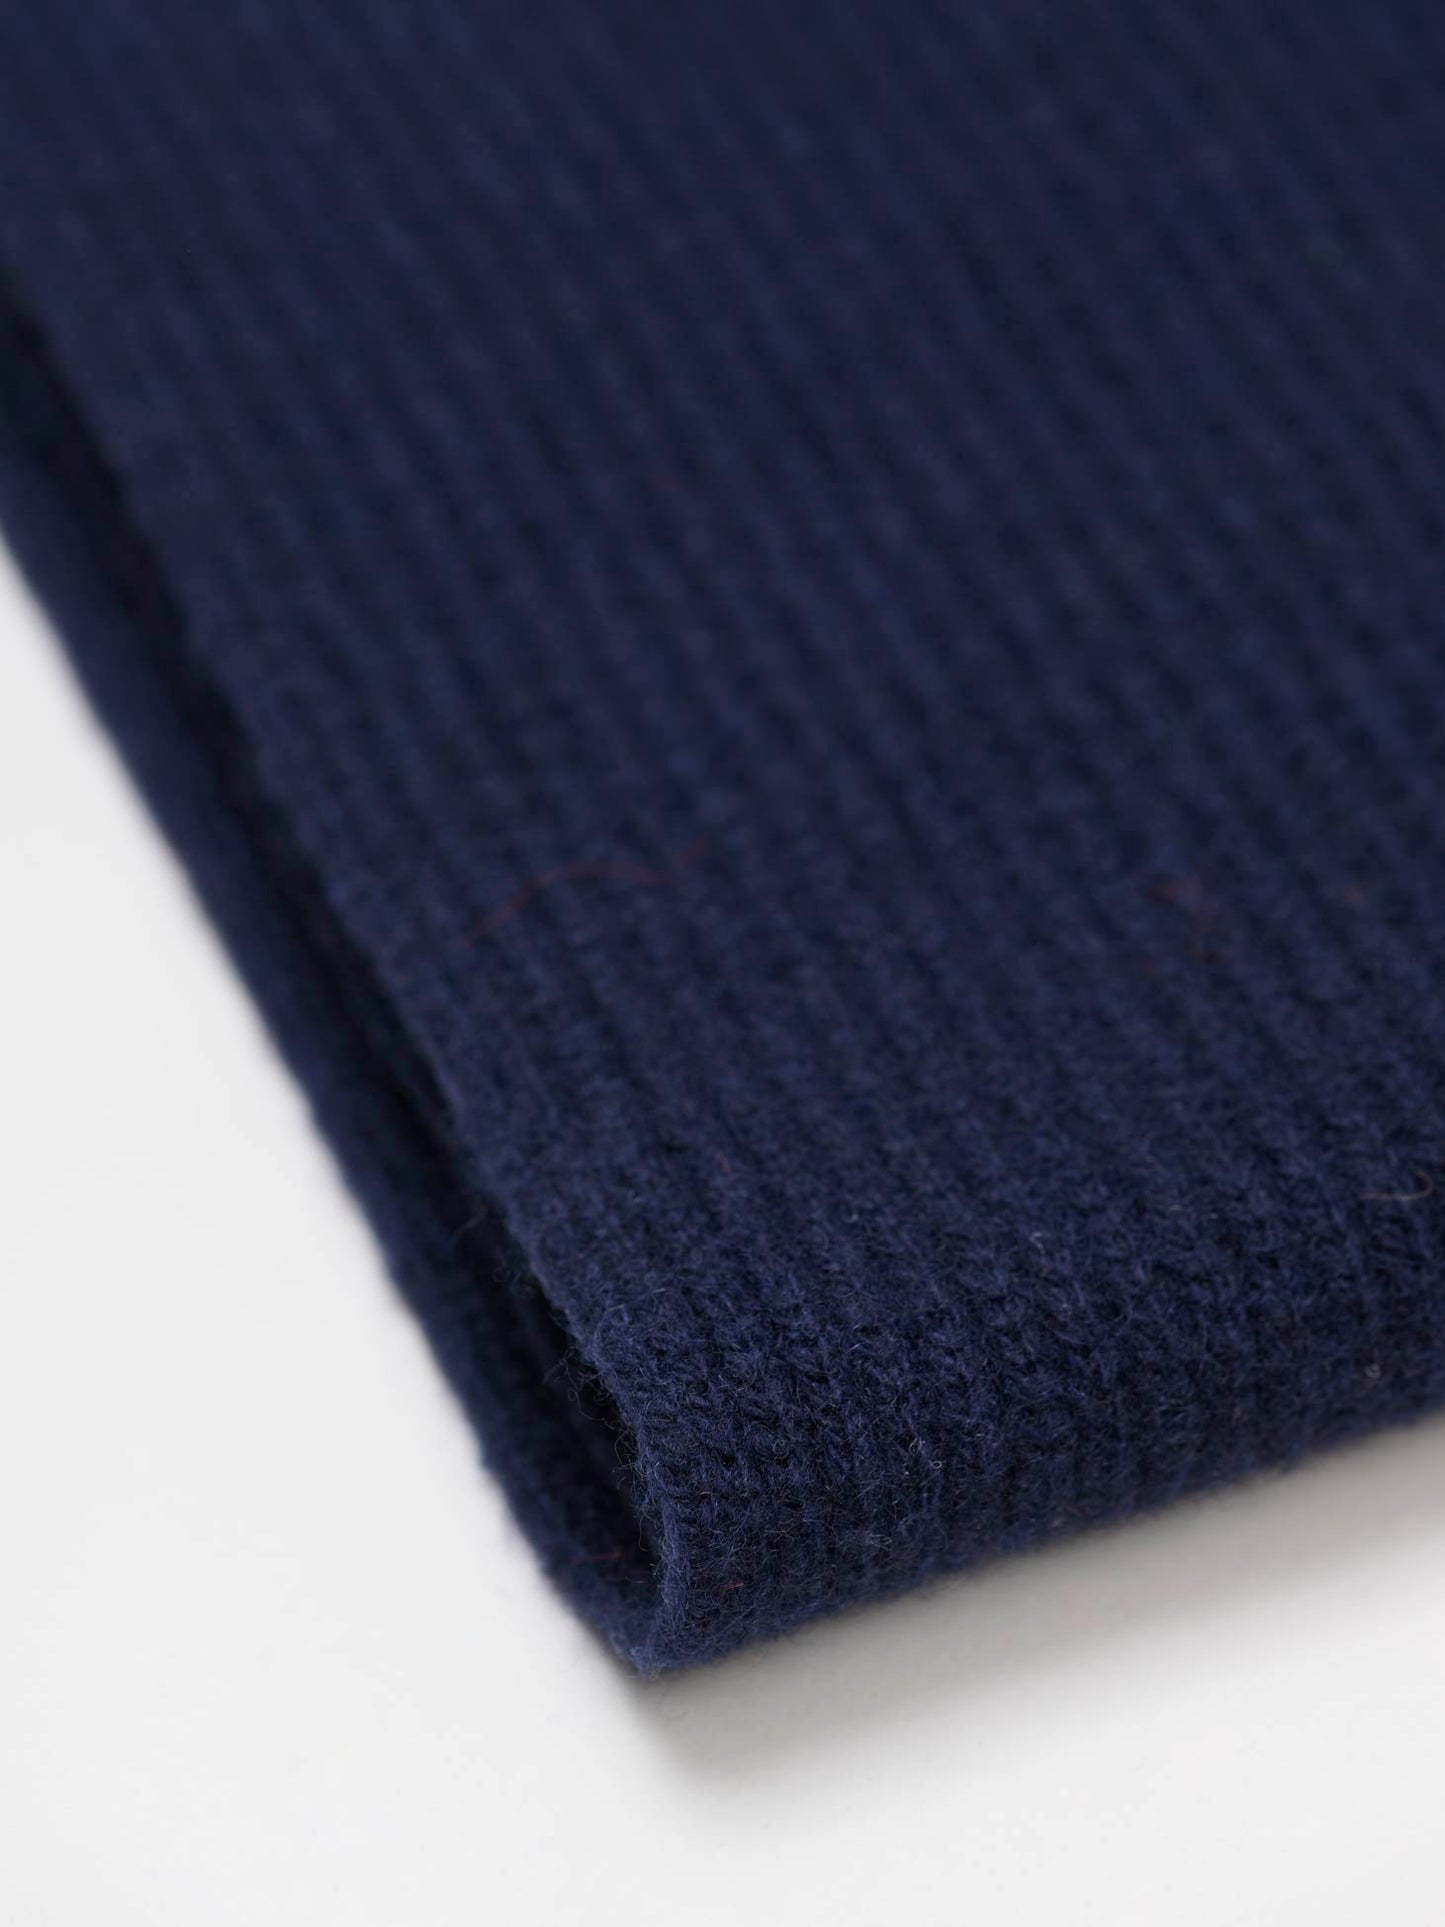 Recycled Cashmere Ribbed Scarf, Navy